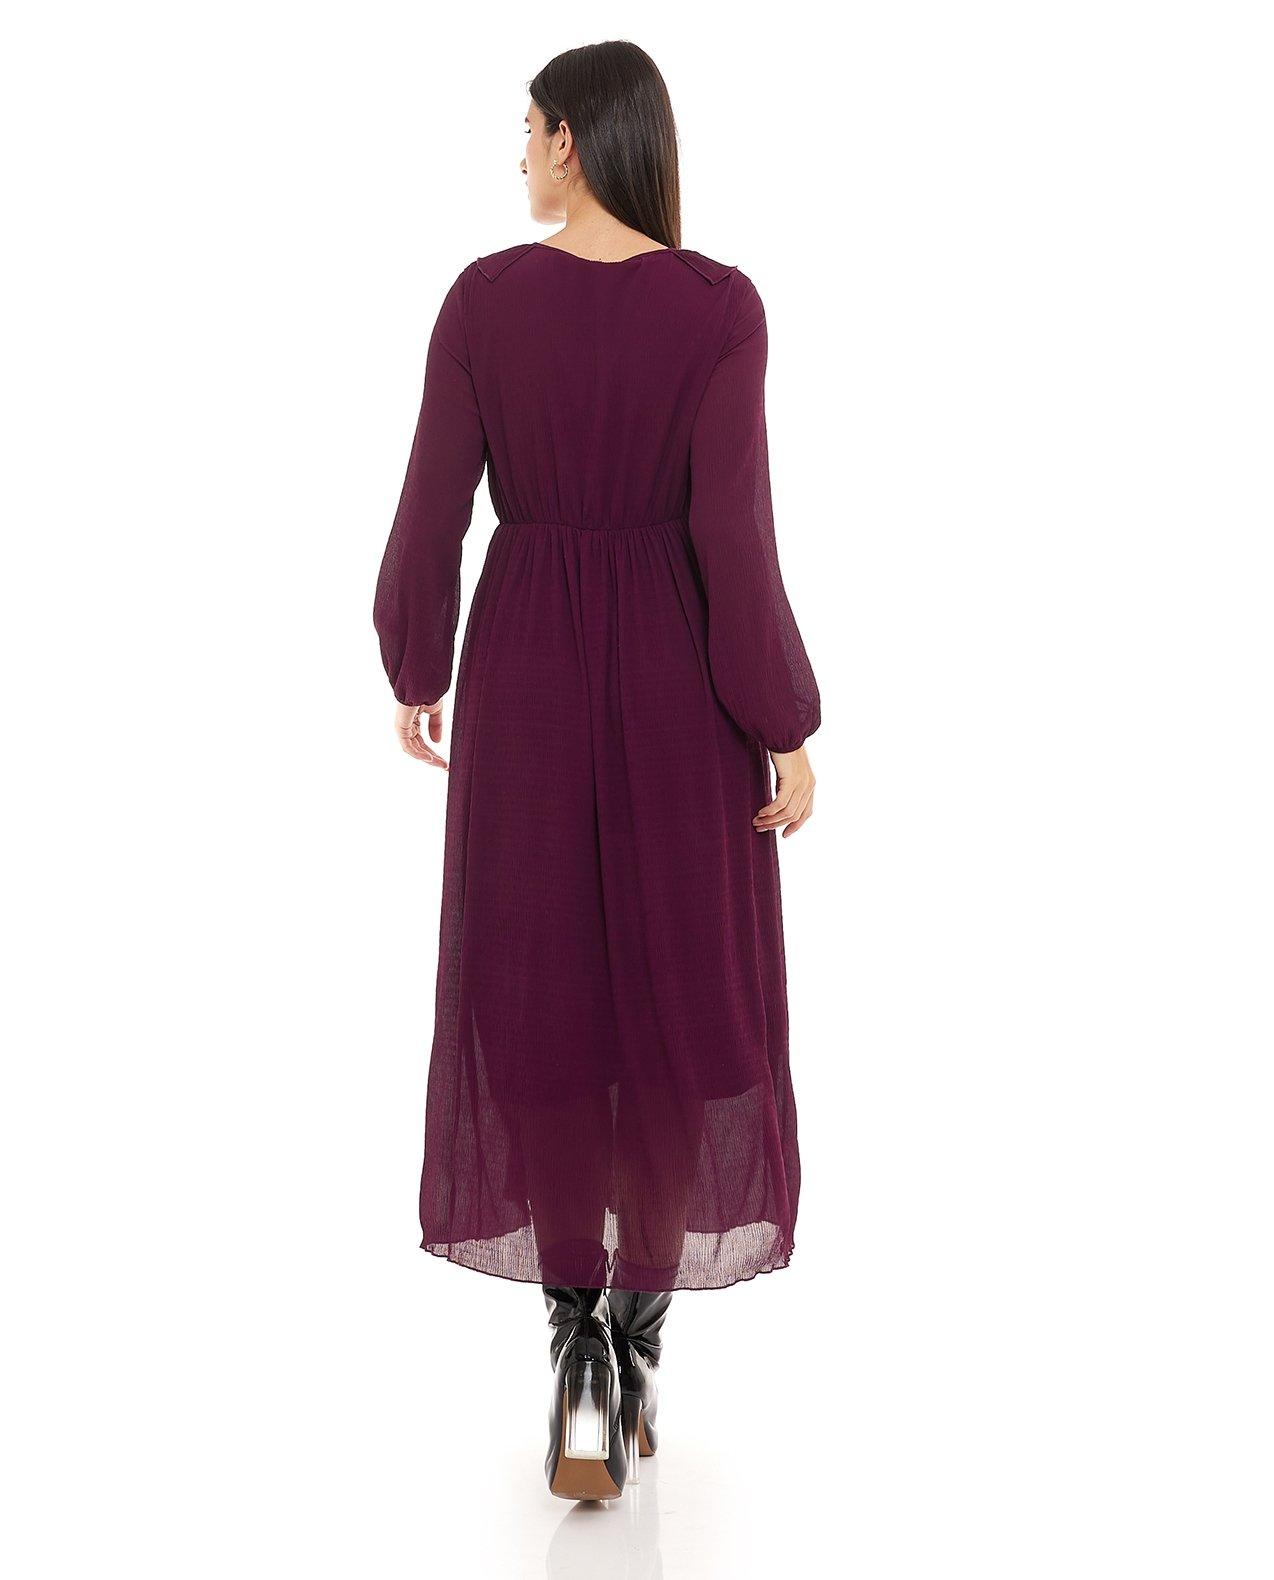 Shop Solid Midi Dress with V-Neck and Long Sleeves Online | R&B UAE